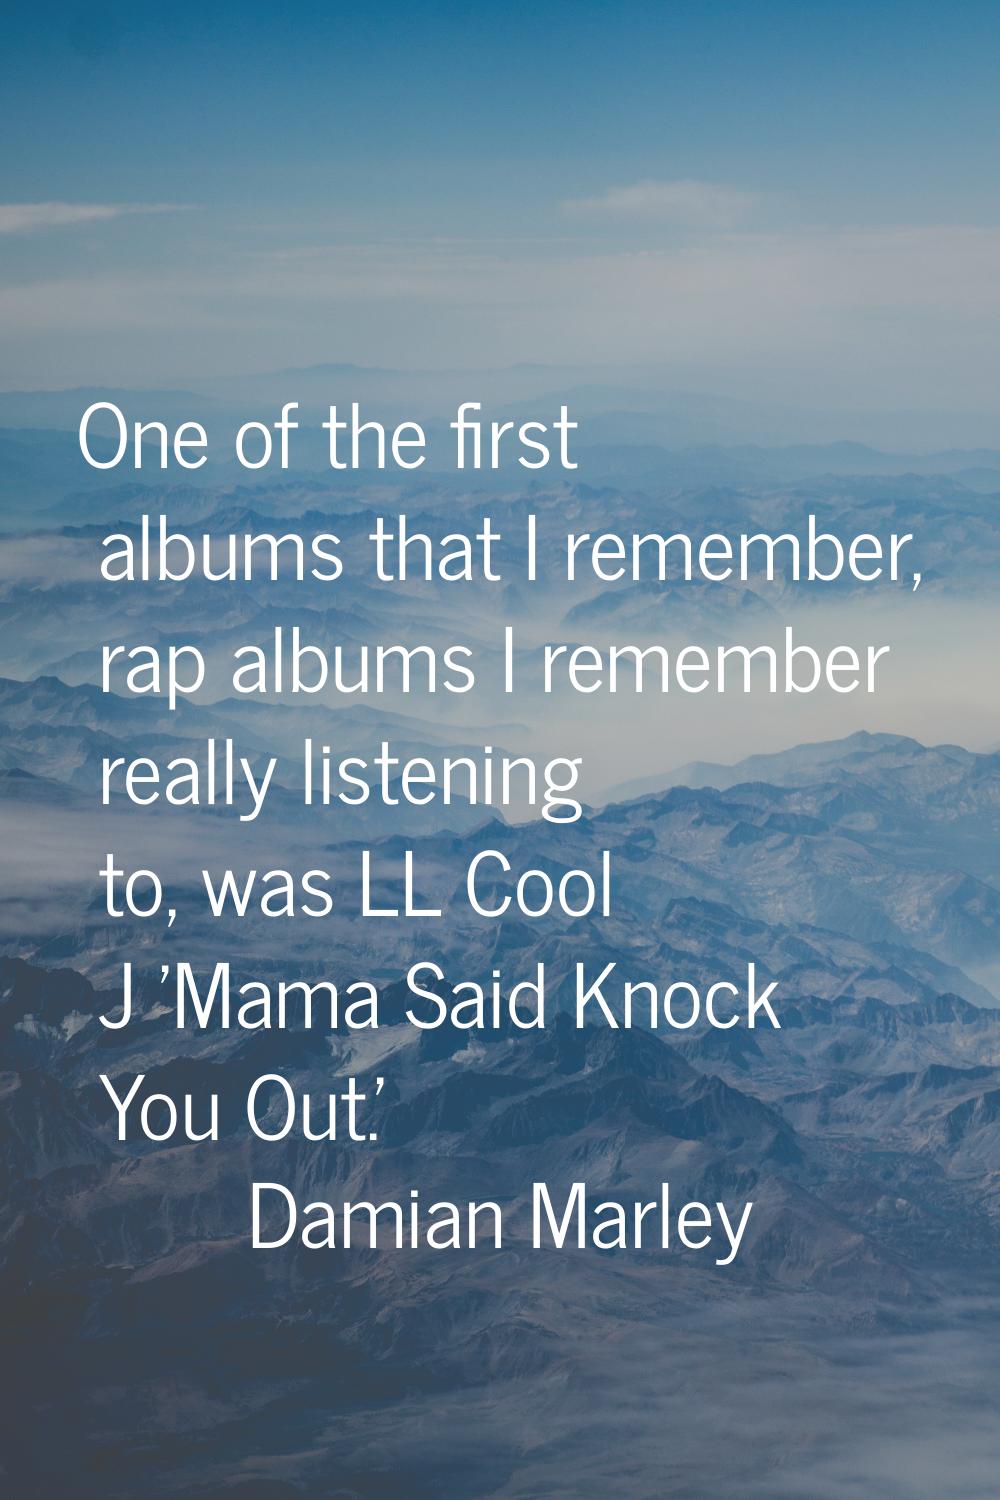 One of the first albums that I remember, rap albums I remember really listening to, was LL Cool J '